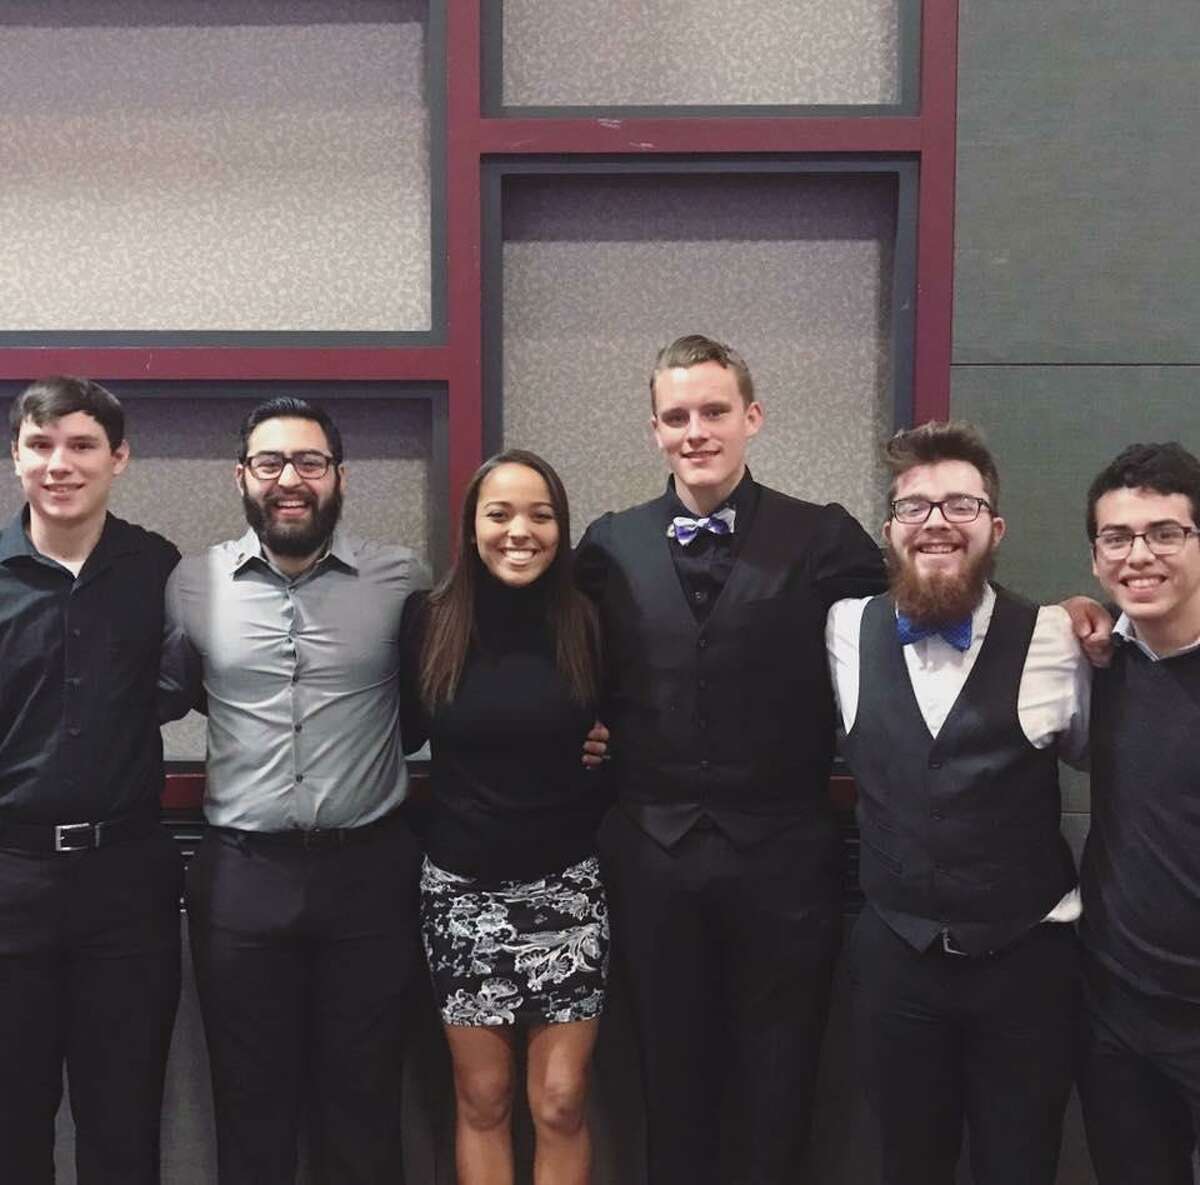 Dru Estes poses for a photo in 2016 with the bassline from the Texas State Bobcat Marching Band. Estes, second from the right, stands next to his friend, Michael Holubec, center. Estes, 20, is among those who were killed in a massive fire at the Iconic Village Apartments in San Marcos on Friday, July 20, 2018, his family said on social media.